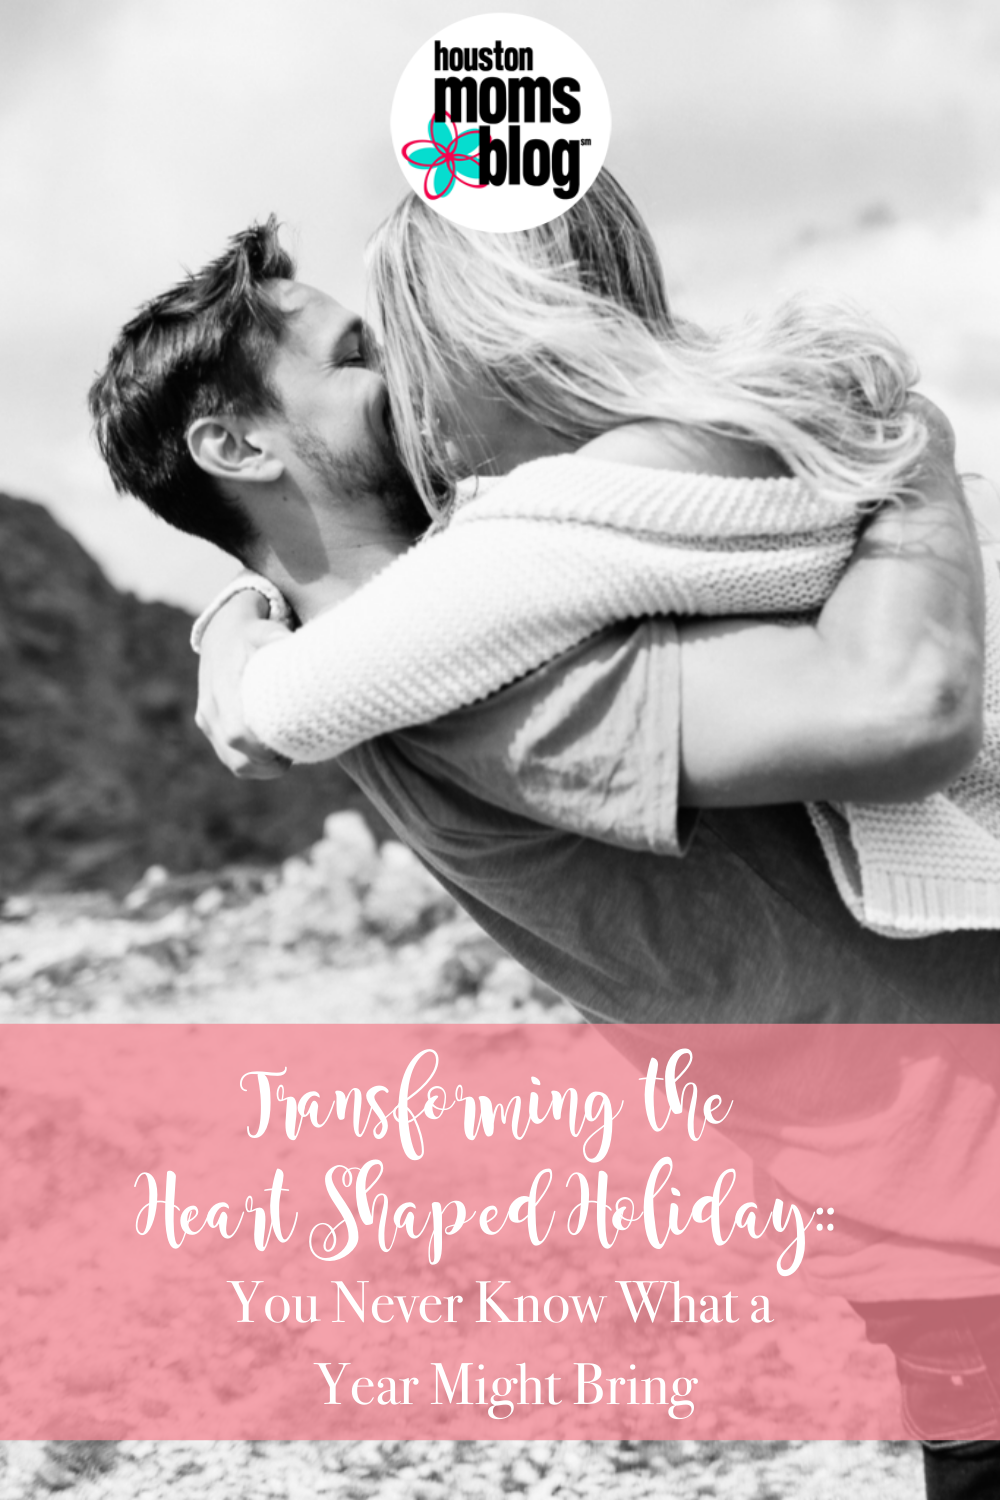 Houston Moms Blog "Transforming the Heart Shaped Holiday:: You Never Know What a Year Might Bring" #houstonmomsblog #momsaroundhouston